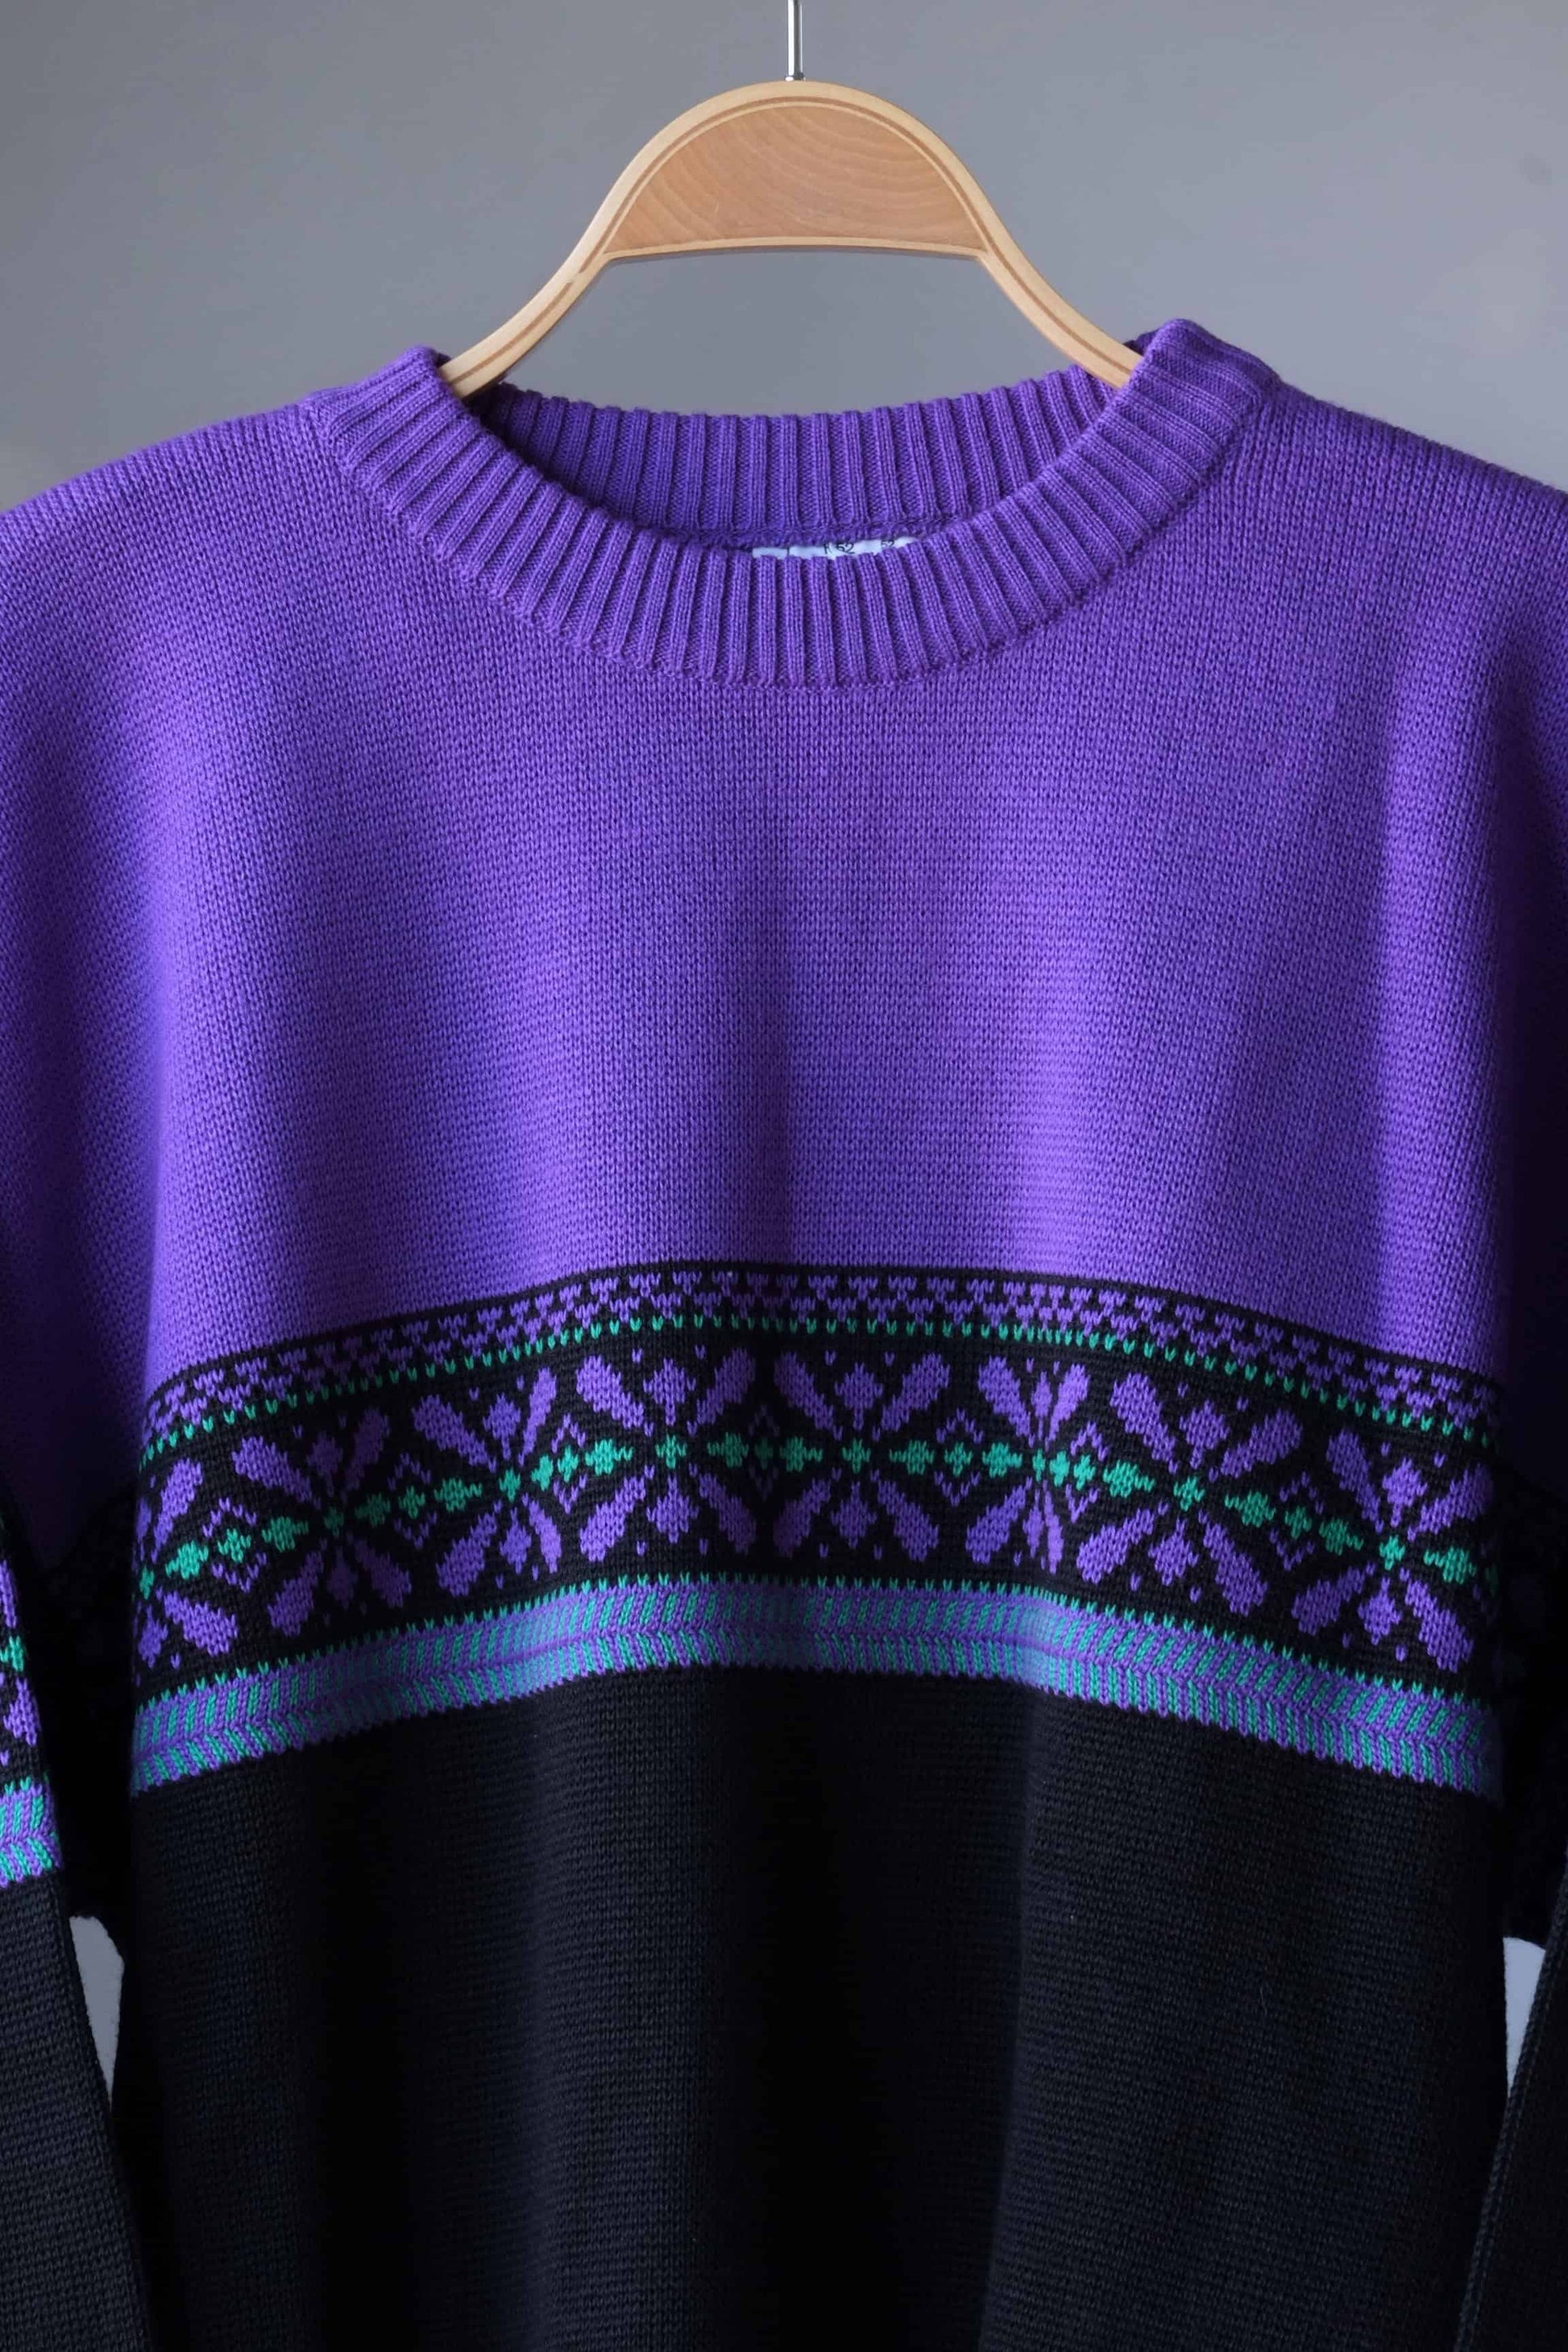 Vintage 90's Mohair Patterned Sweater close up